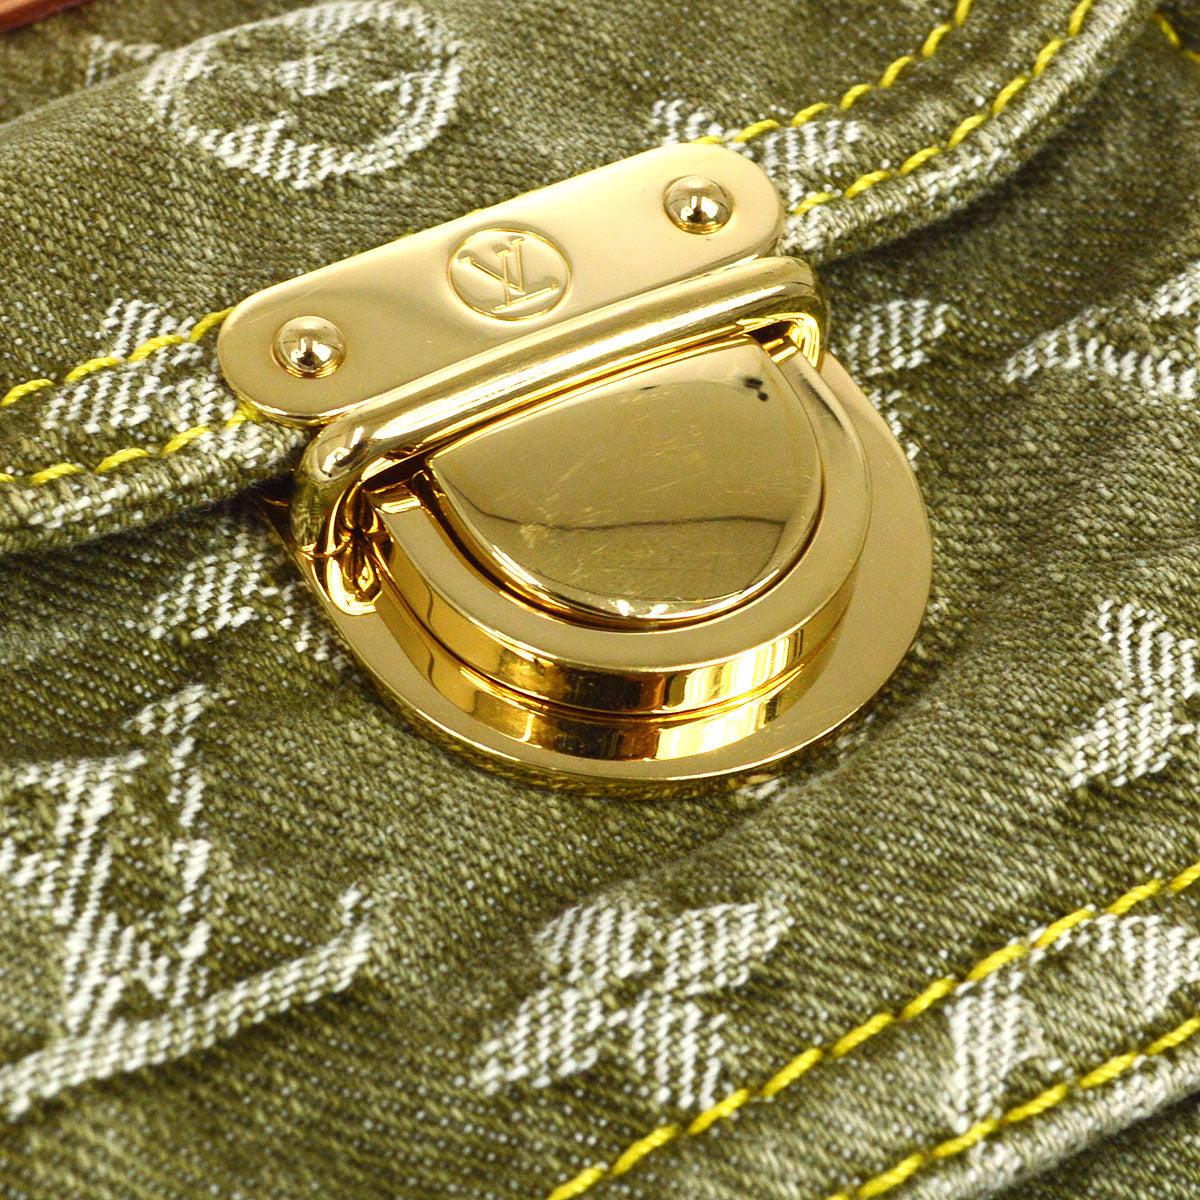 Pre-Owned Vintage Condition
From  2006 Collection
Monogram Denim  
Leather Trim
Gold Hardware
W 11.8 x H 7.7 x D 3.9 